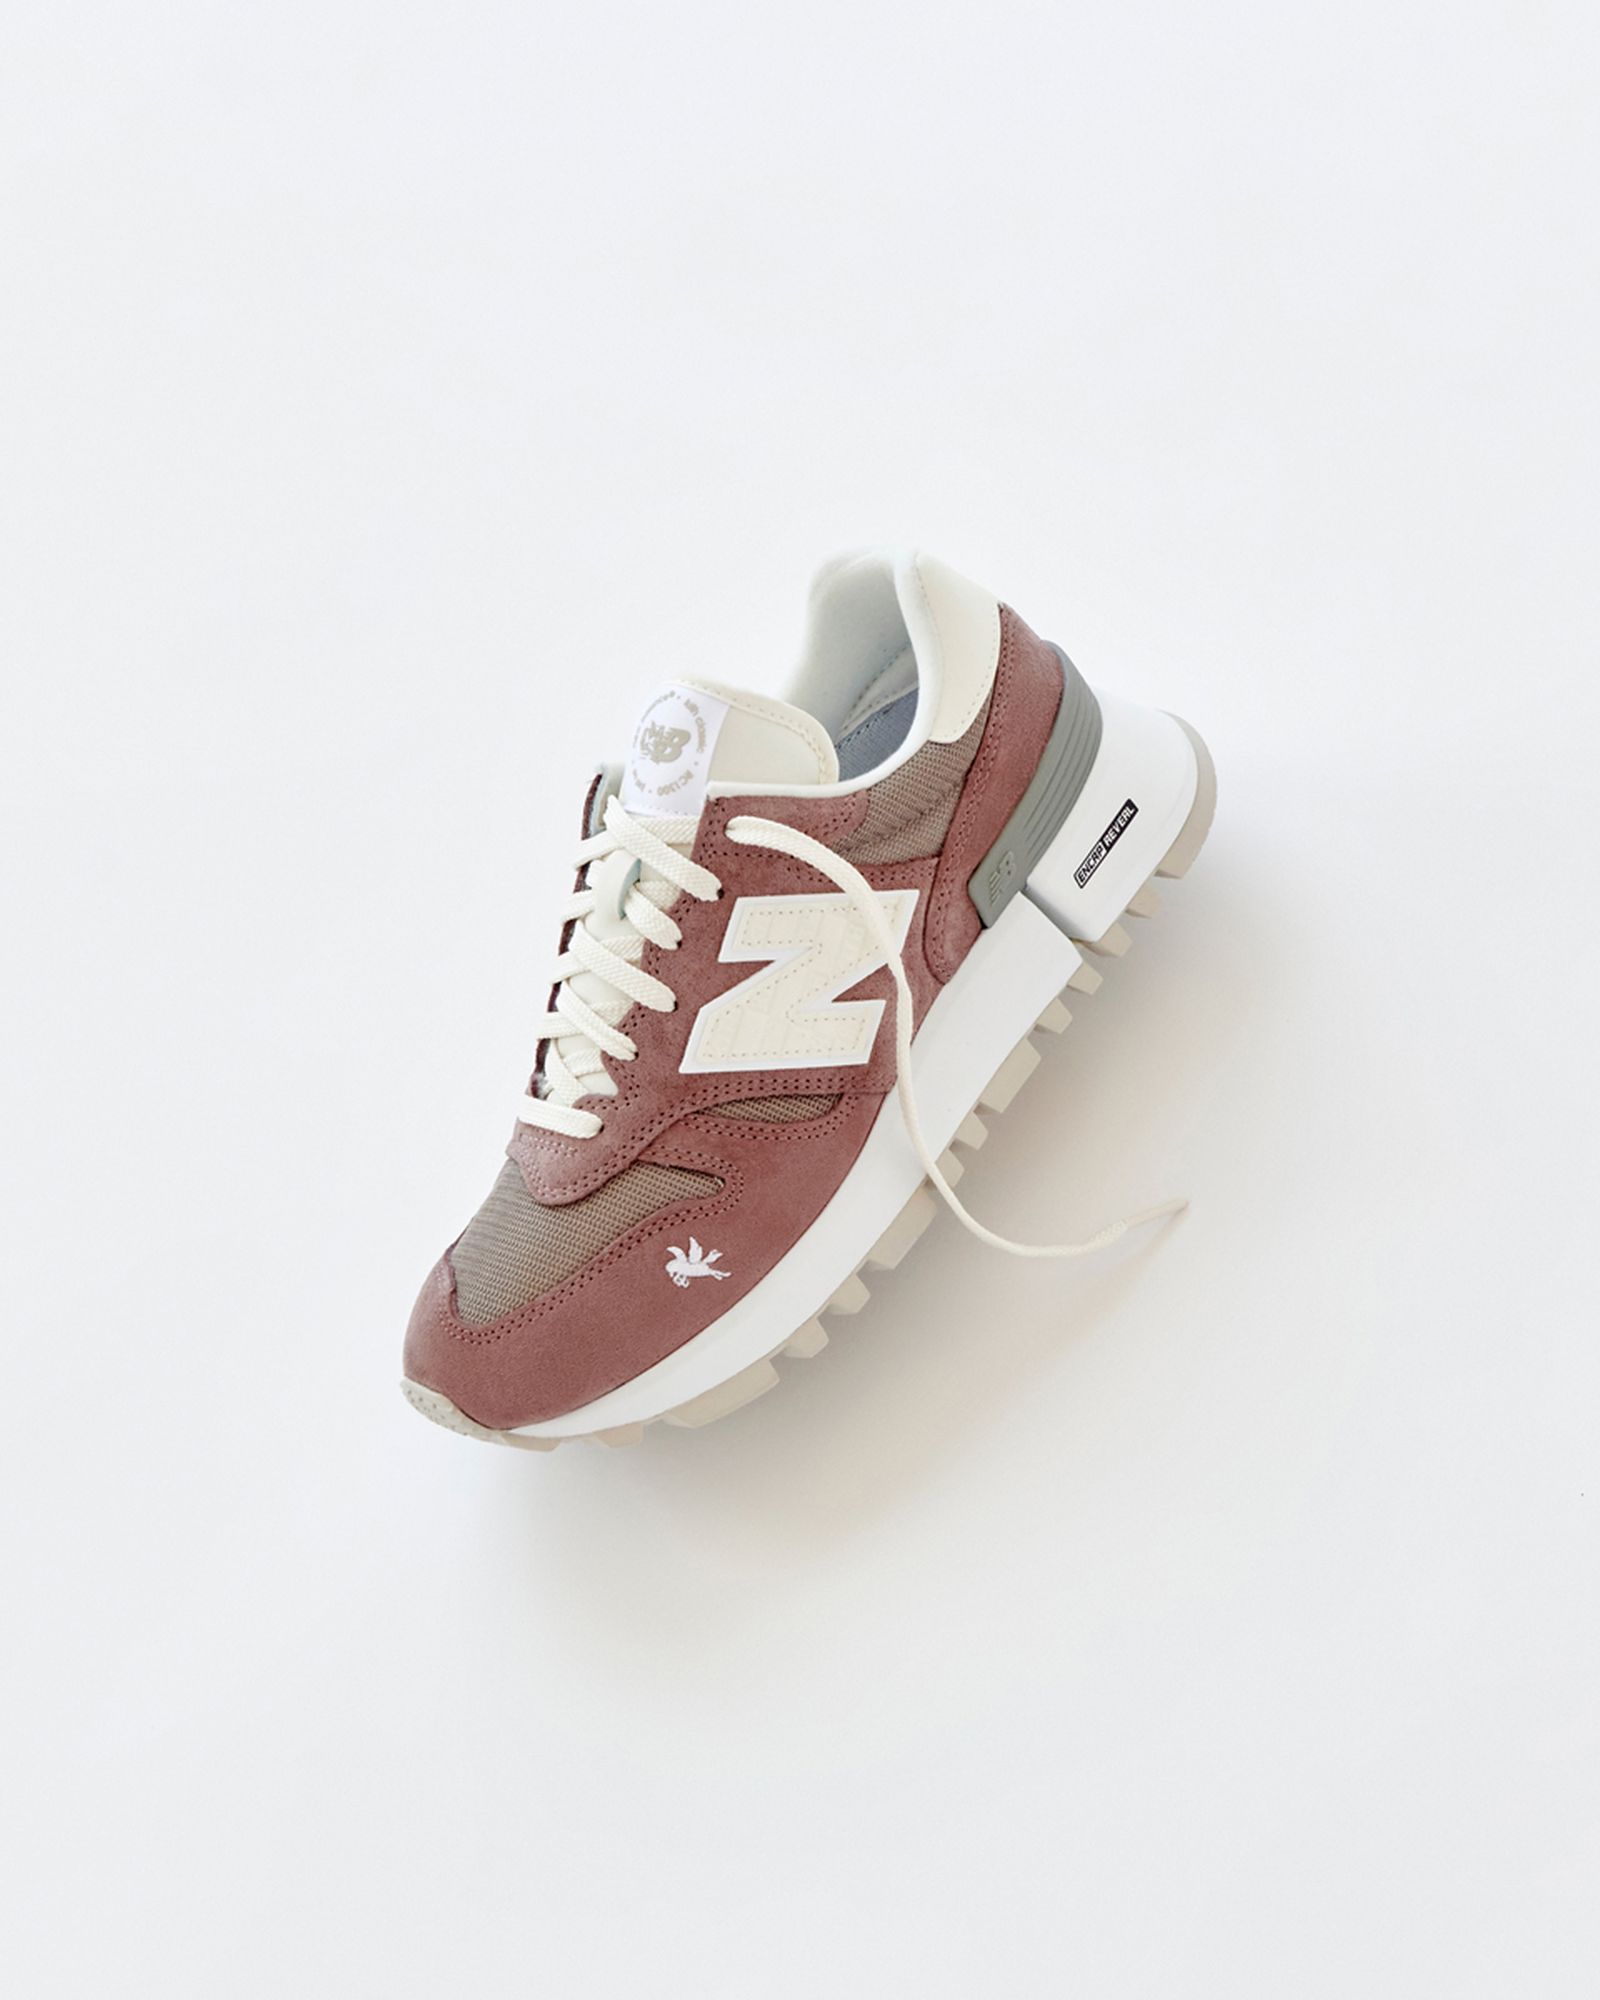 KITH x New Balance RC_1300 10th Anniversary Collection